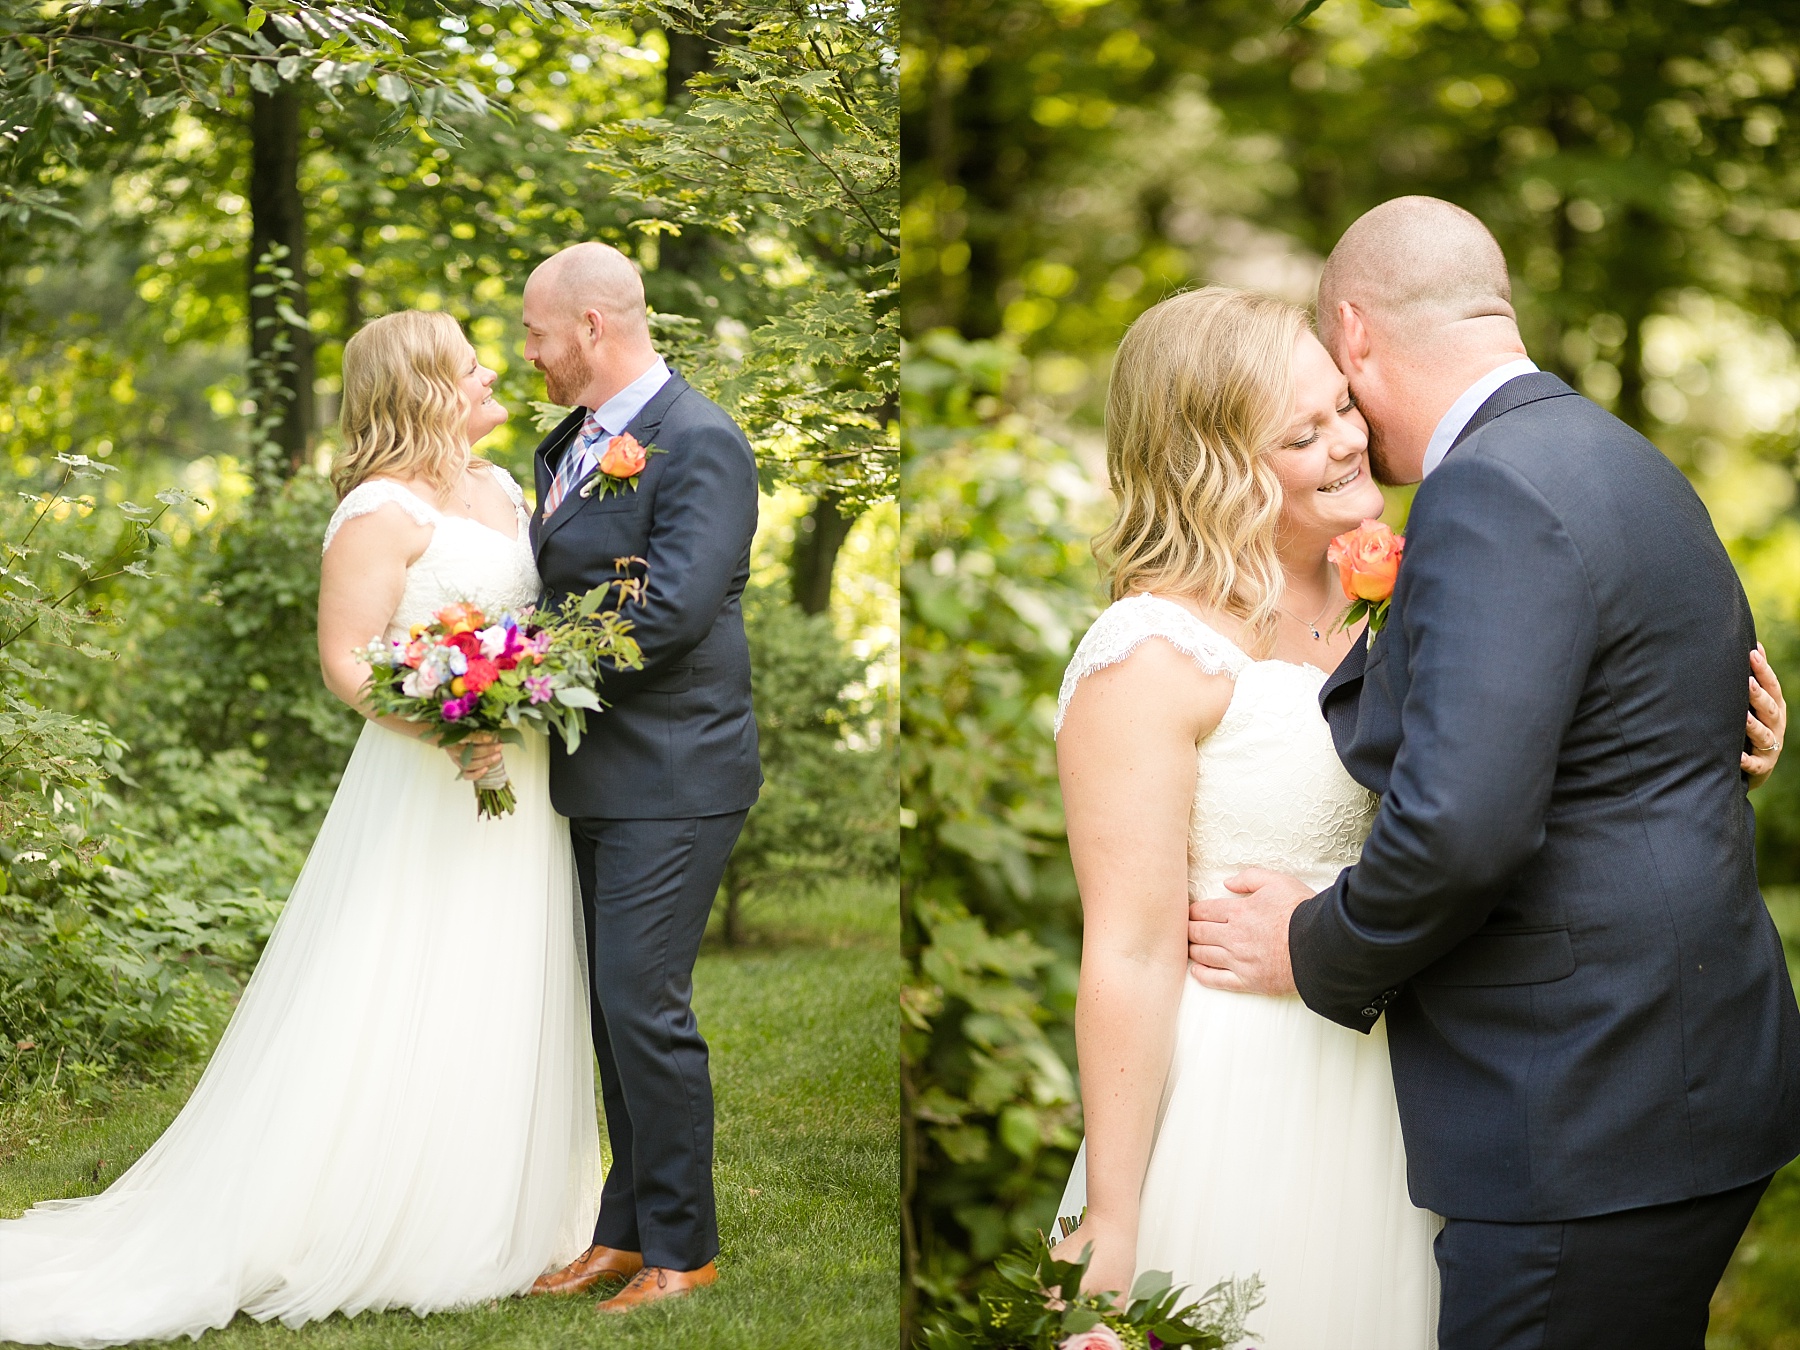 An intimate backyard wedding with little flecks of golden light shining through the trees, and so much laughter, joy and the good kind of tears made for a beautiful fete for Amber & Glenn.